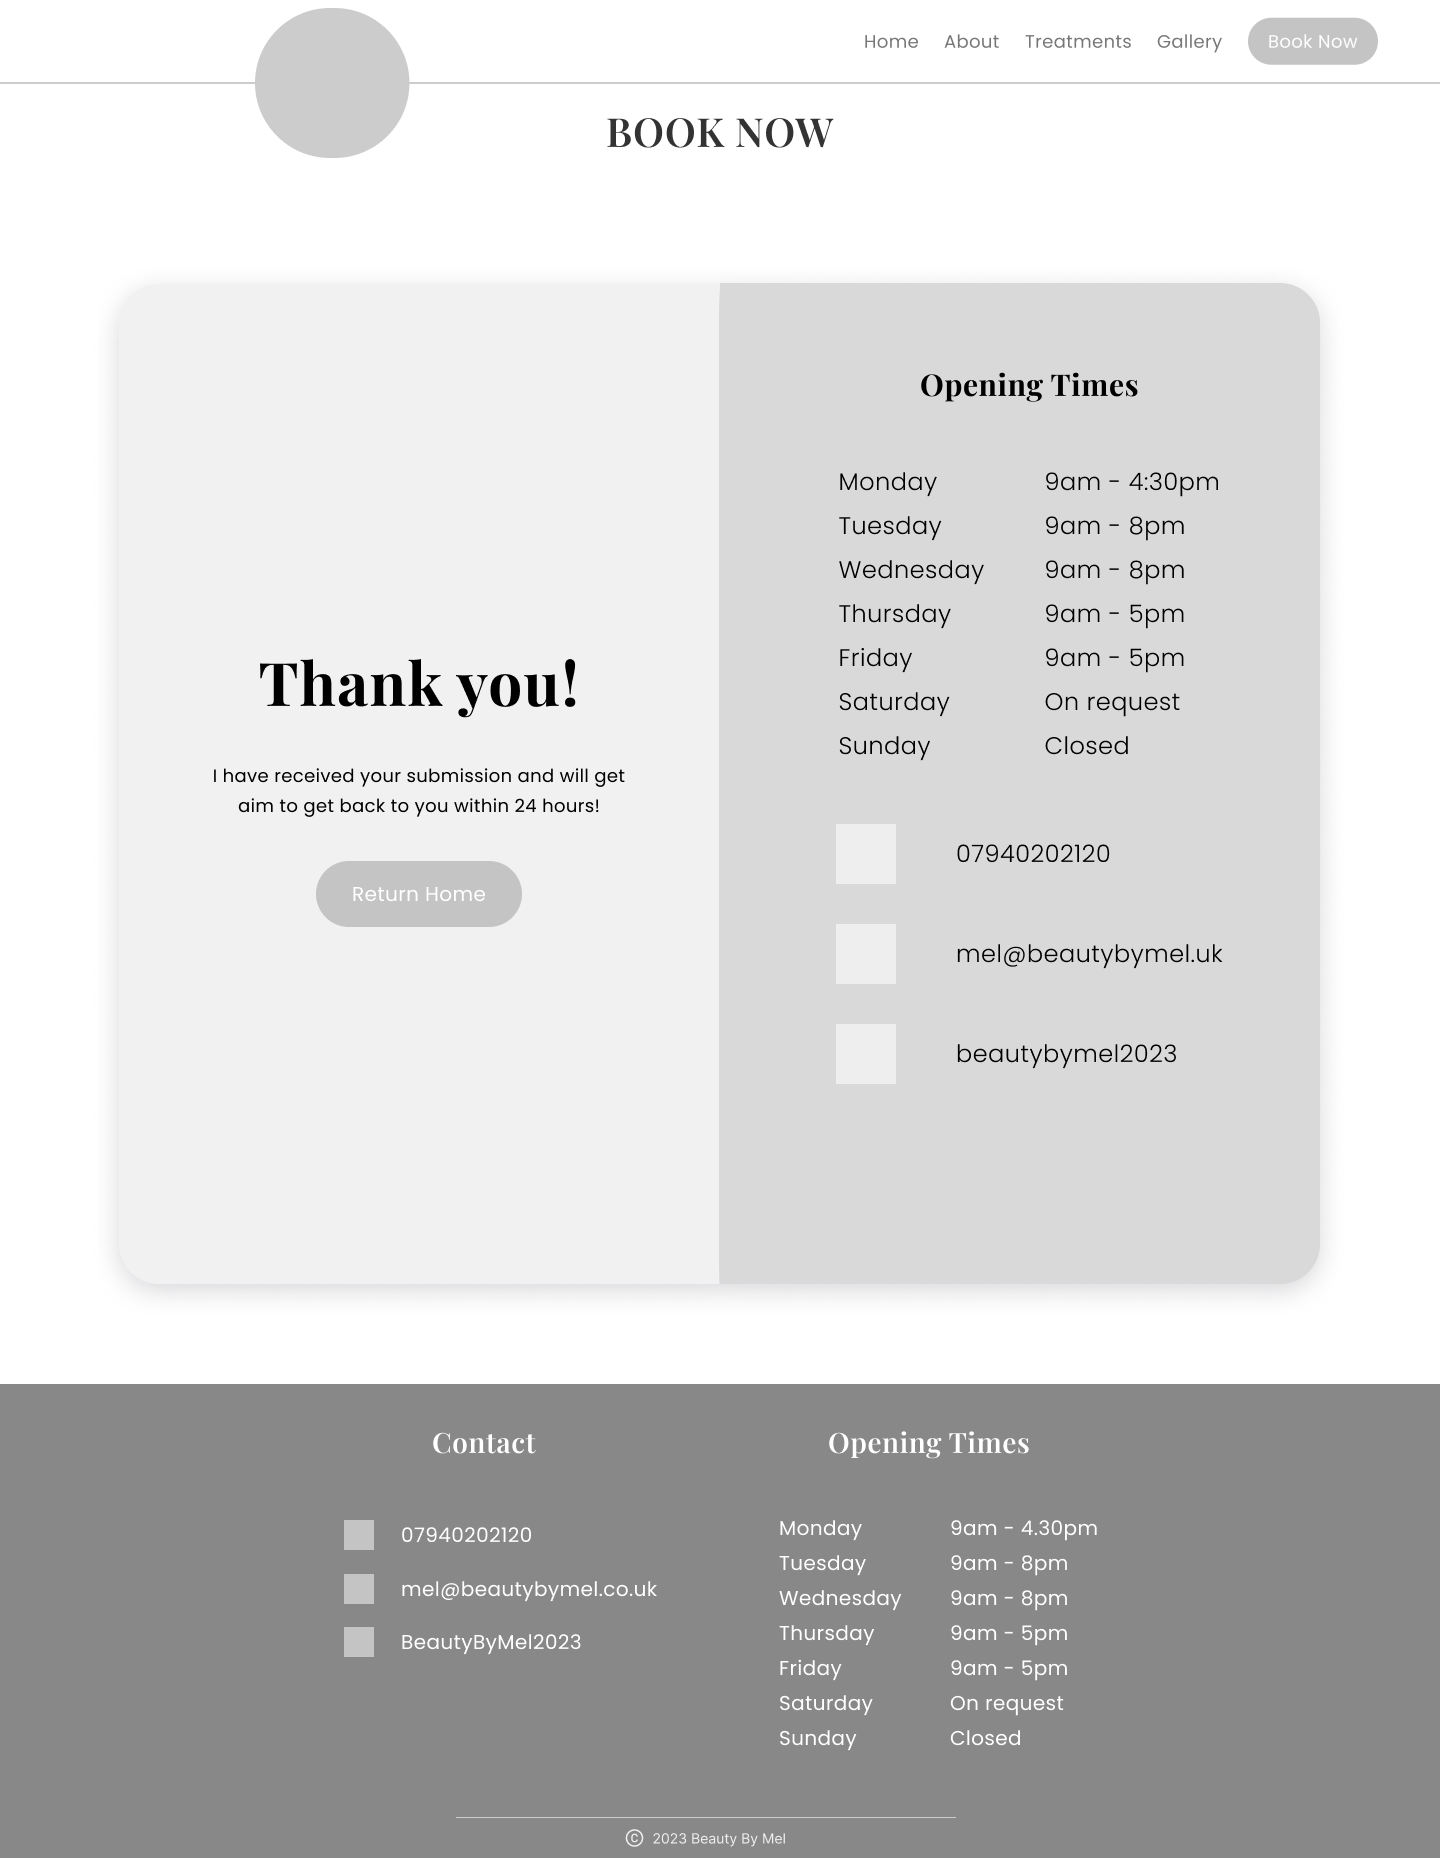 Contact - Form Submitted